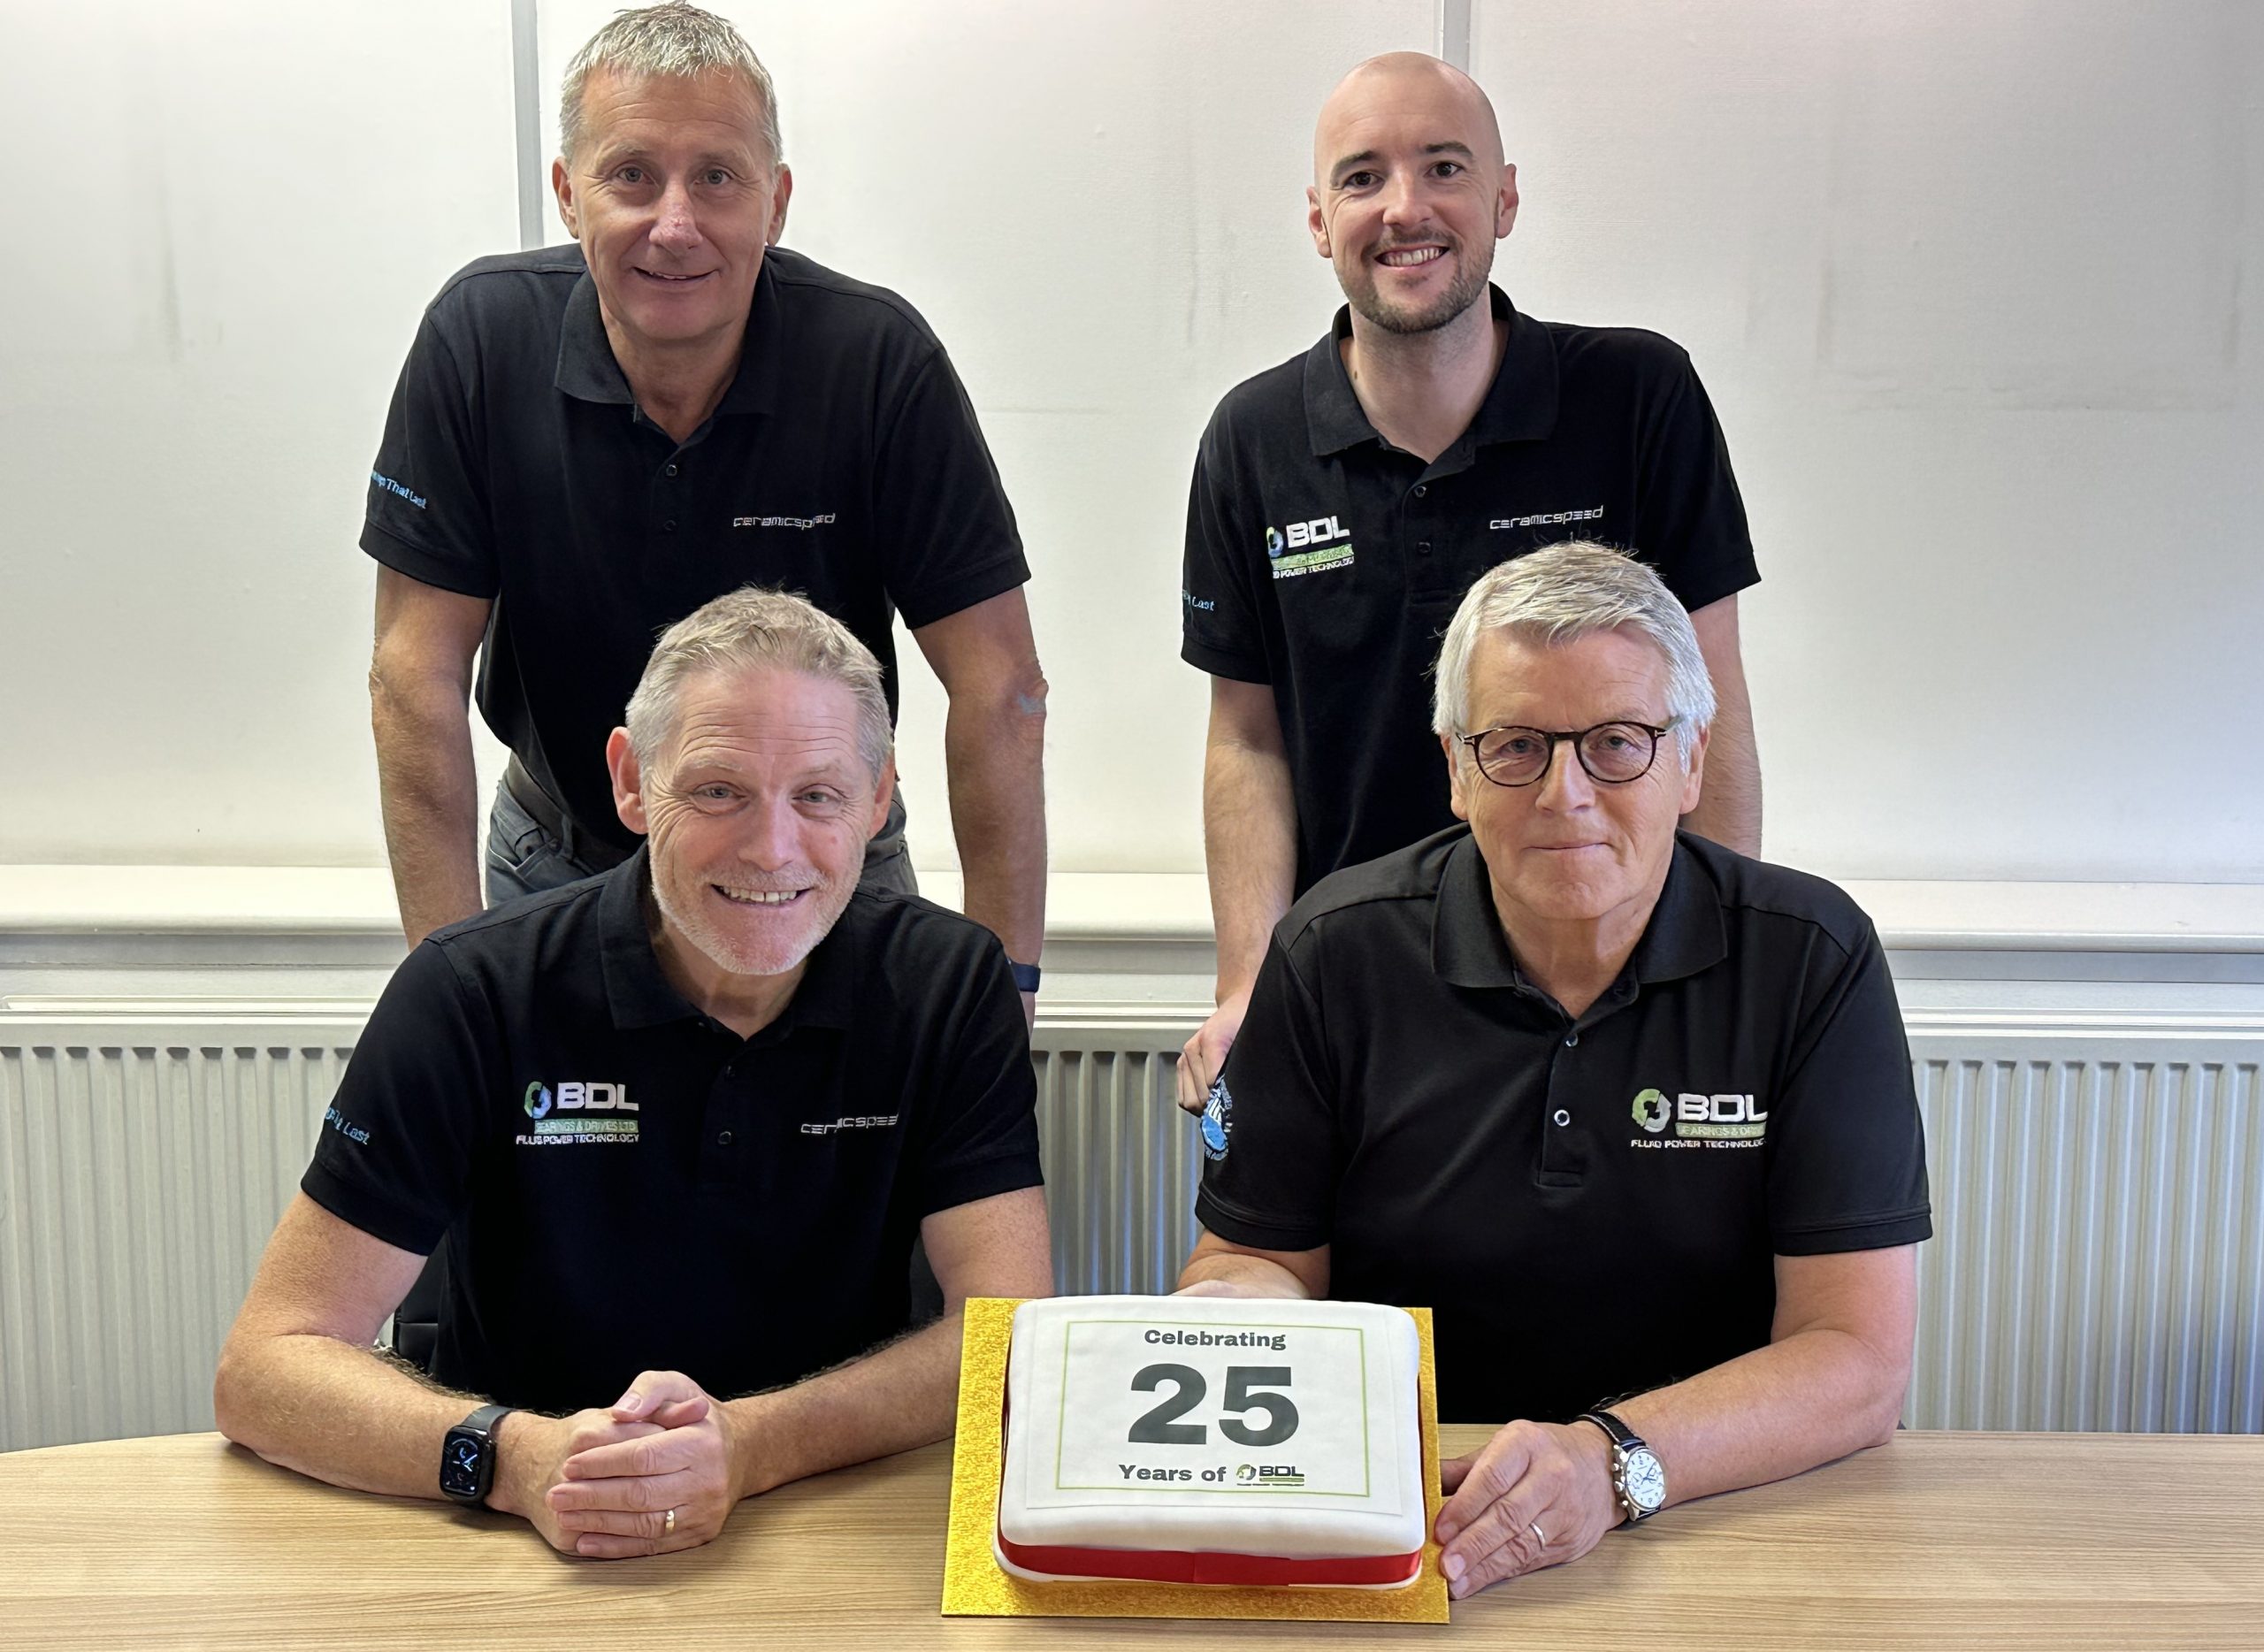 Bearings & Drives Celebrate 25 Years. Top left to right Steve Bacon, Ben Booth. Bottom left to right John Middleton, William Simpson